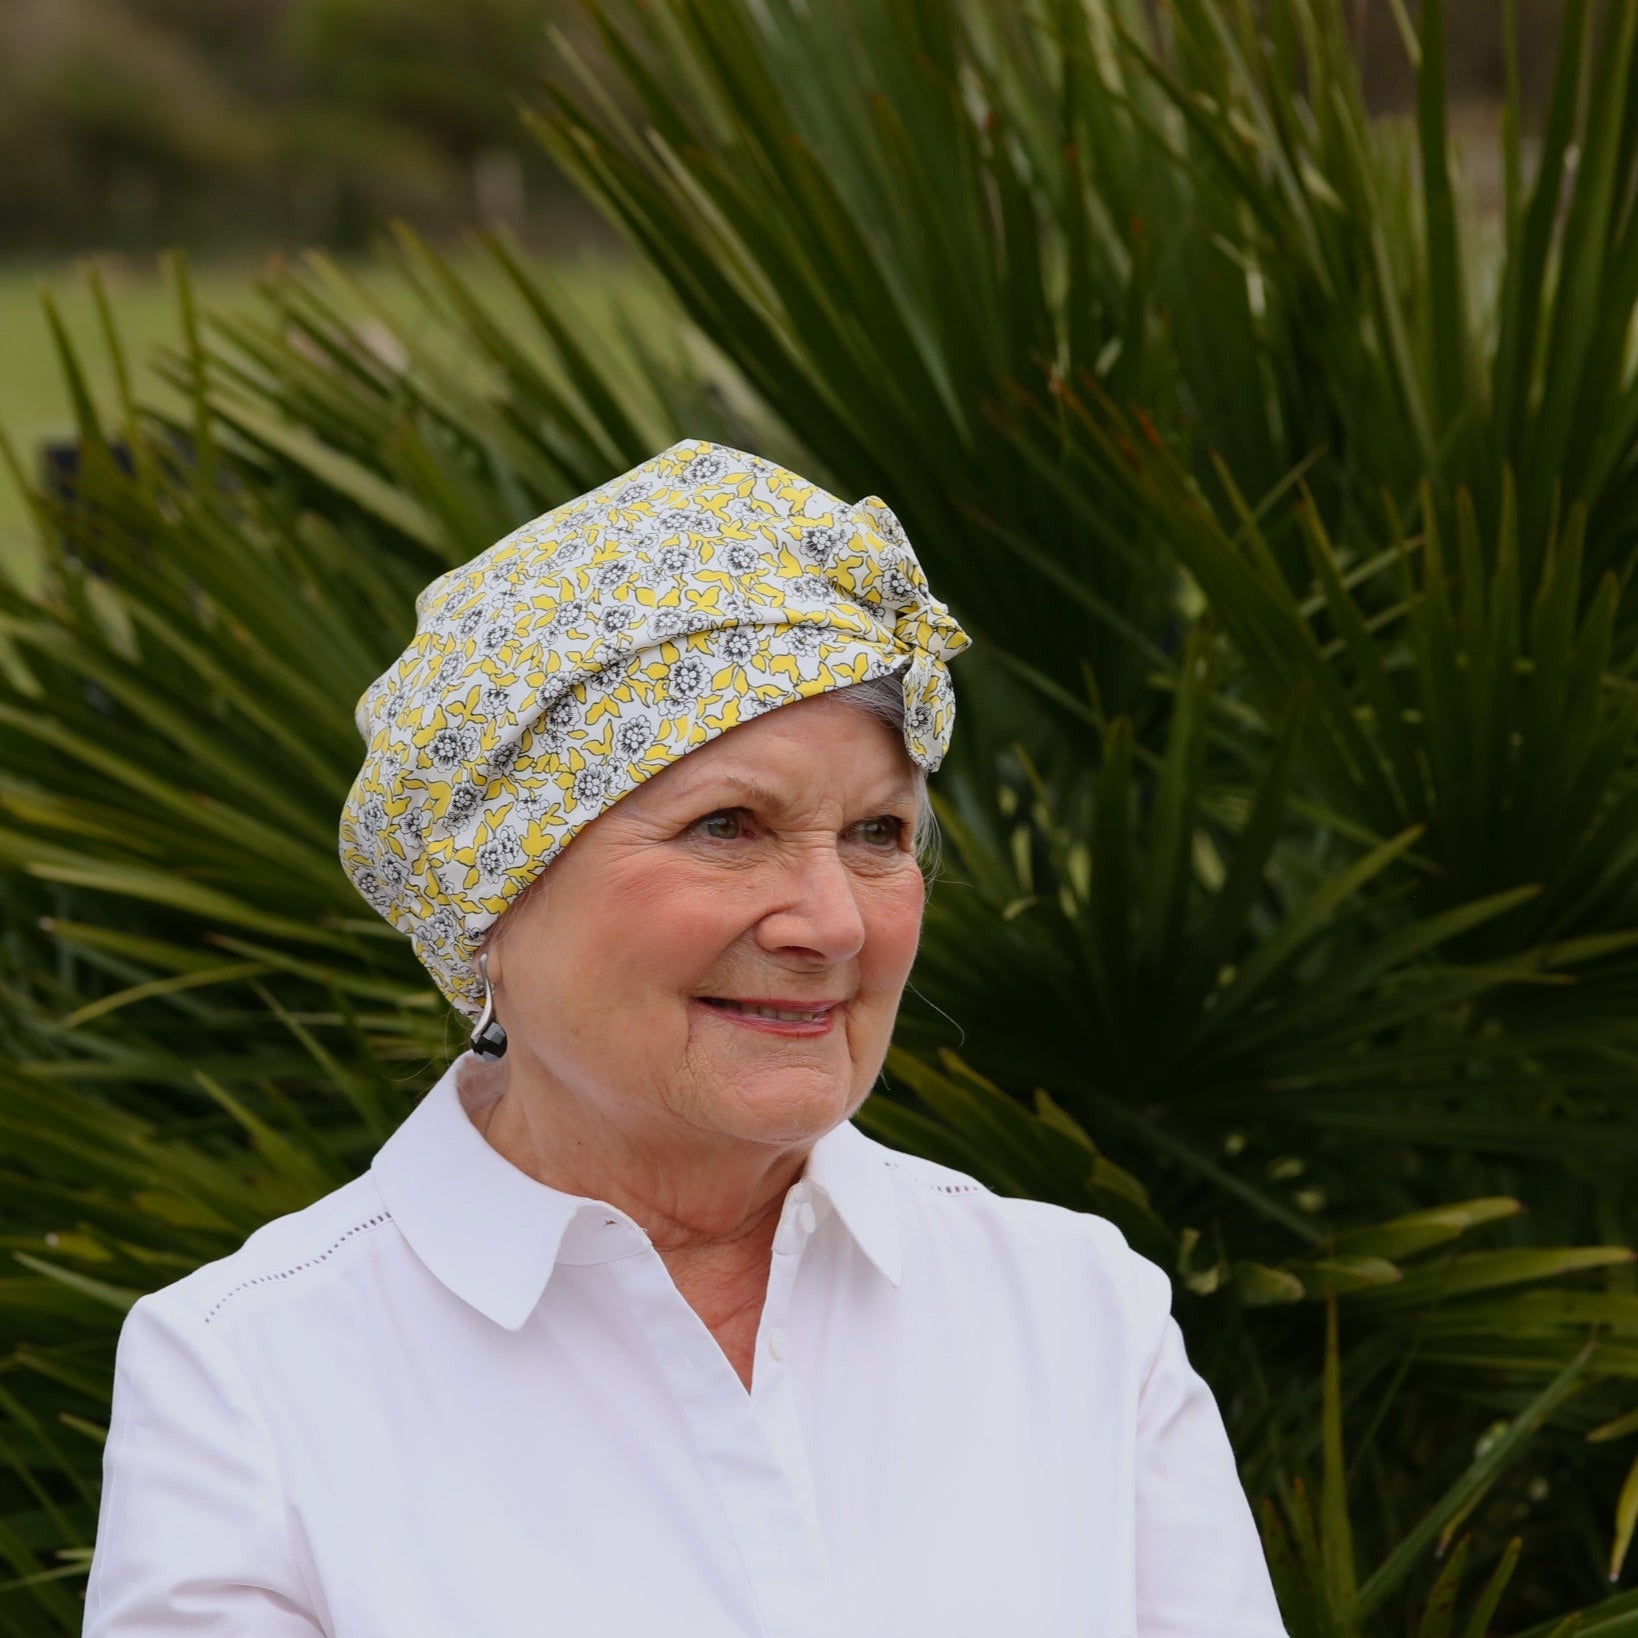 Ladies Turban Hat - Liberty of London Yellow and Black Floral Dinisty - Tot Knots of Brighton